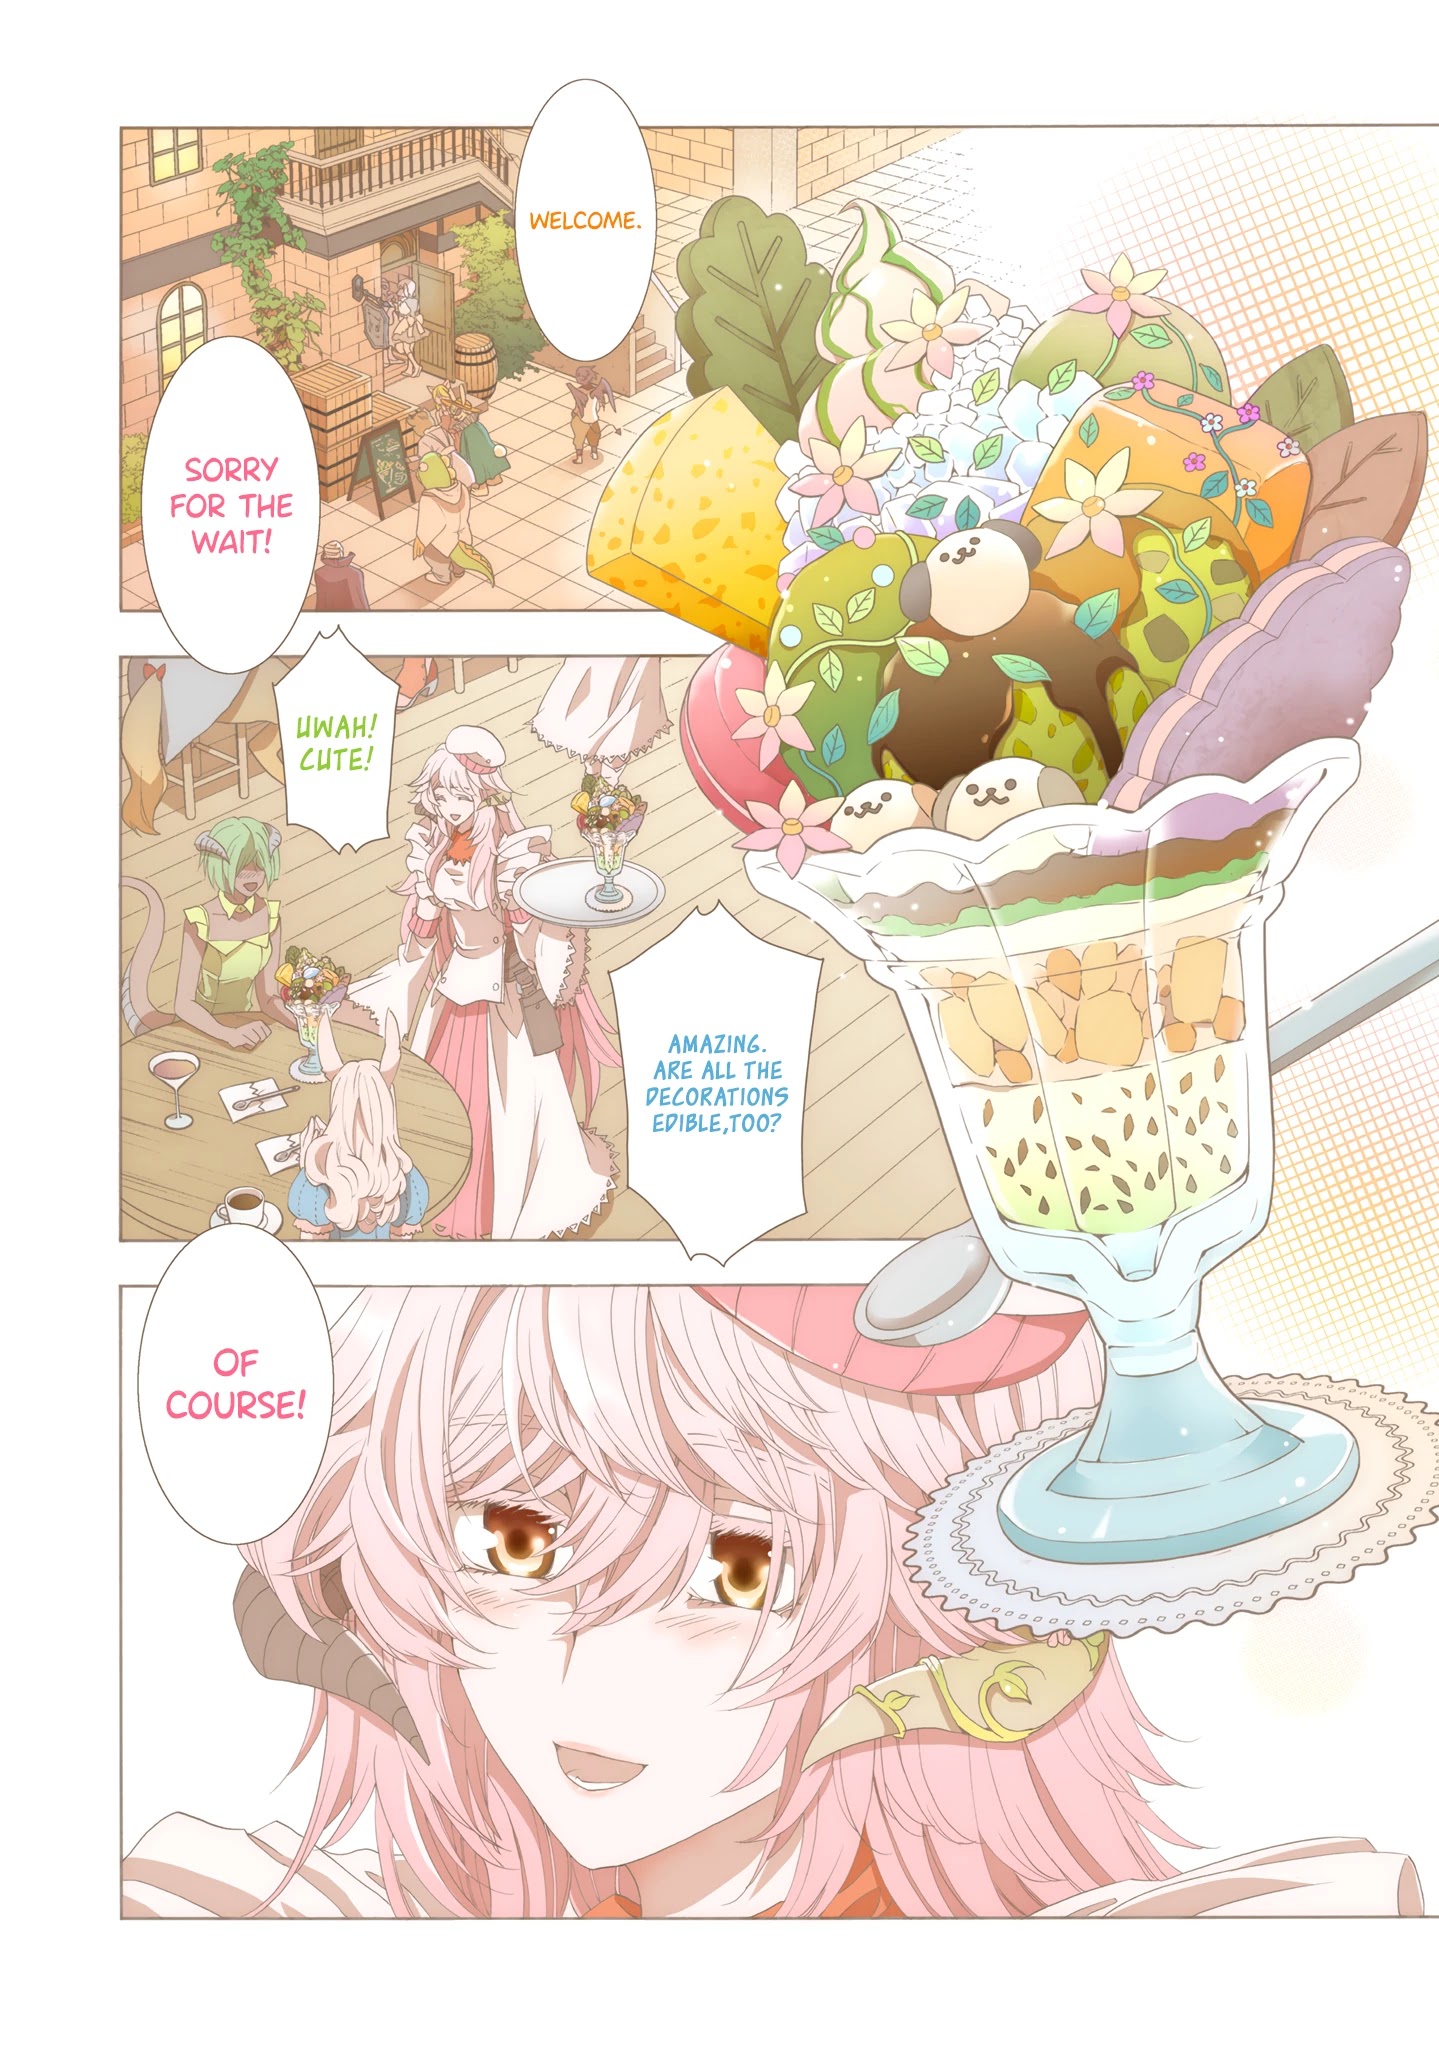 I Was Pleased To Make A Parfait For The Demon King - Page 2